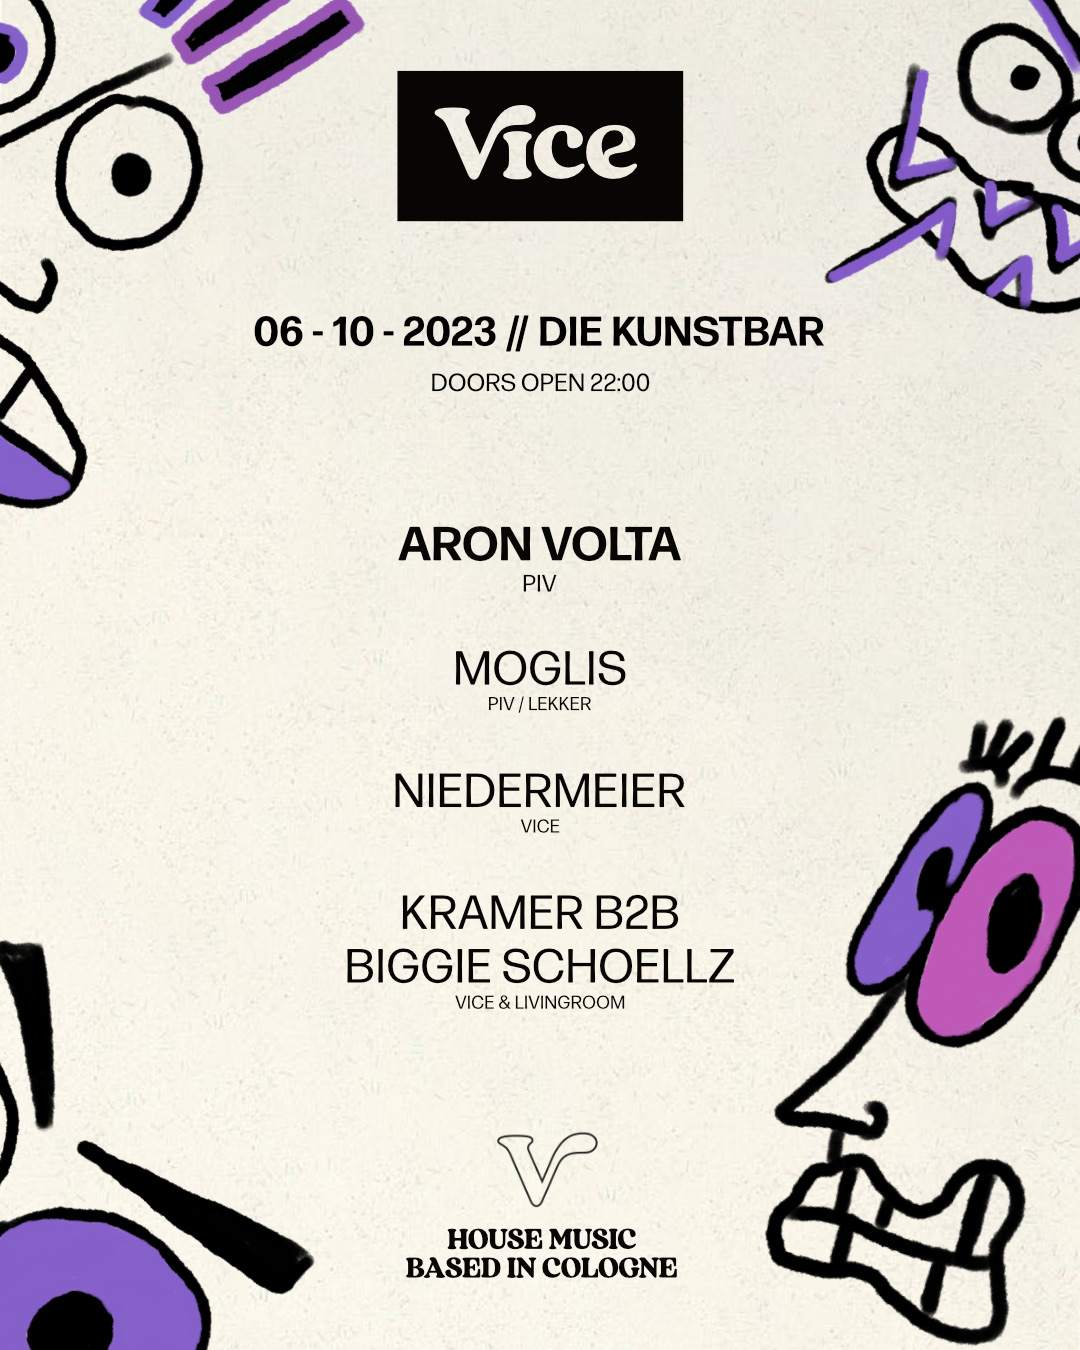 Vice Cologne goes KUNSTBAR (w/ Anil Aras) - フライヤー表